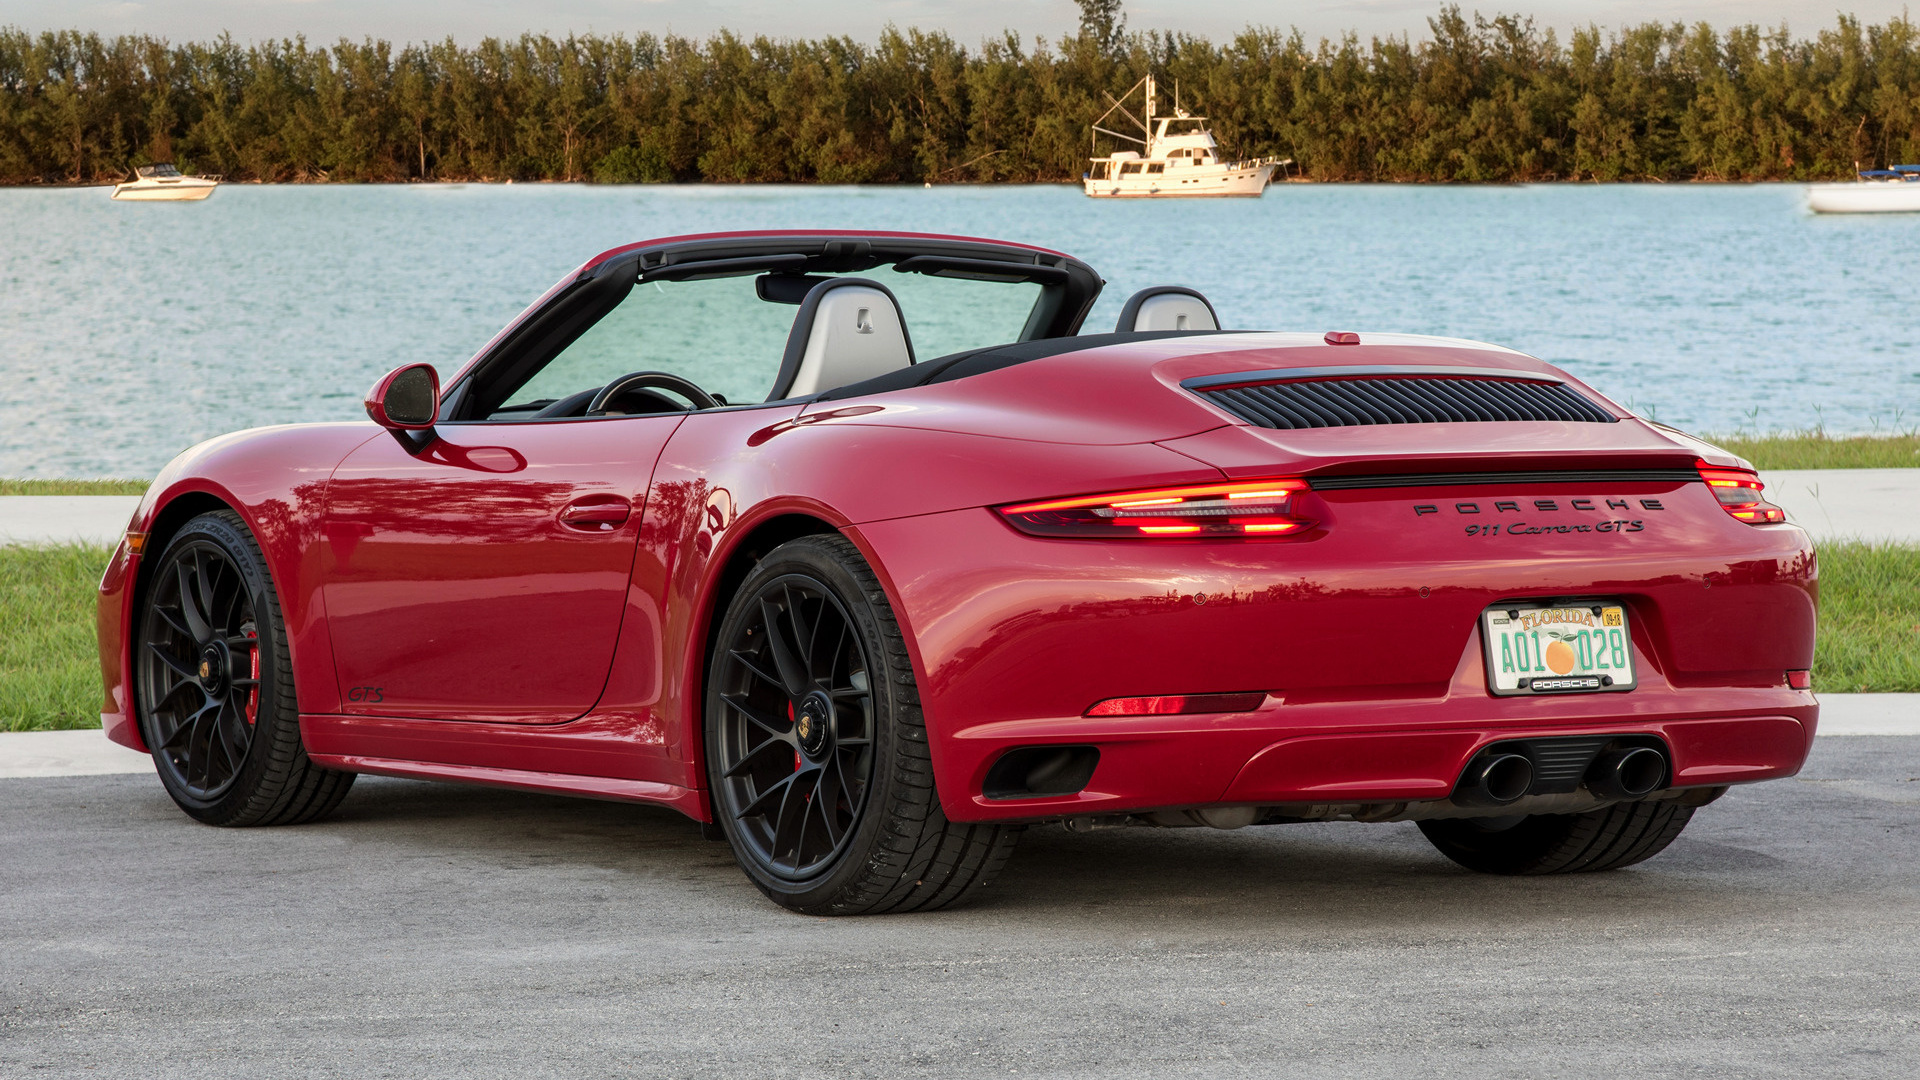 Porsche 911 Carrera GTS Cabriolet (2018) US Wallpapers and HD Images